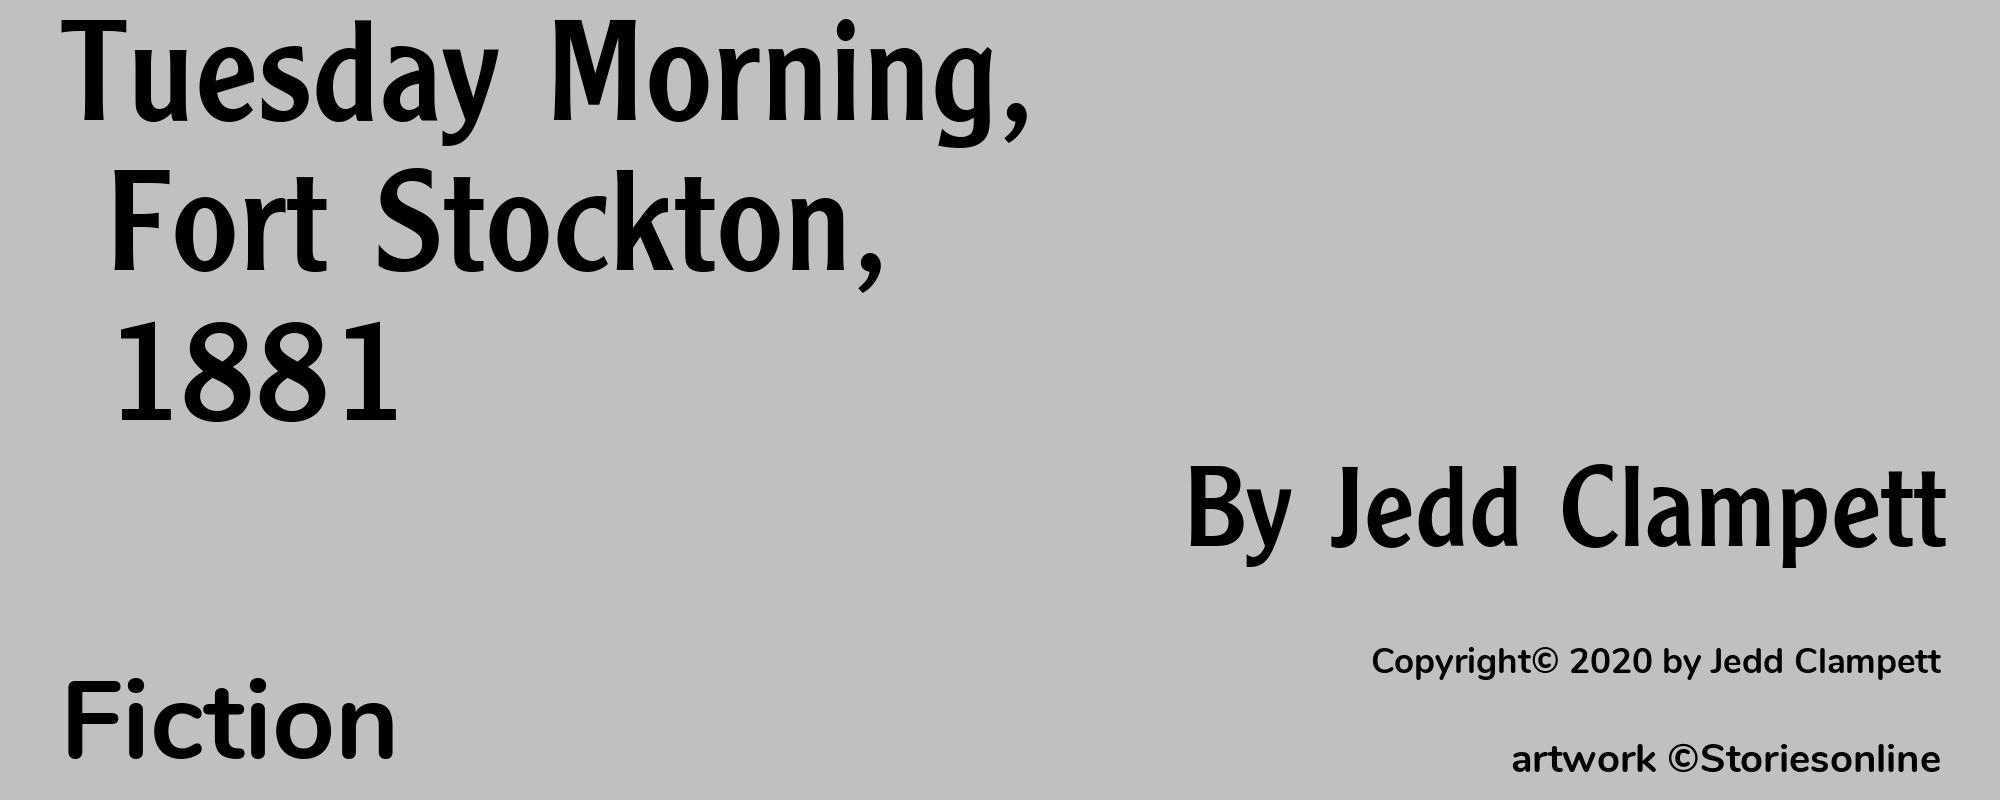 Tuesday Morning, Fort Stockton, 1881 - Cover